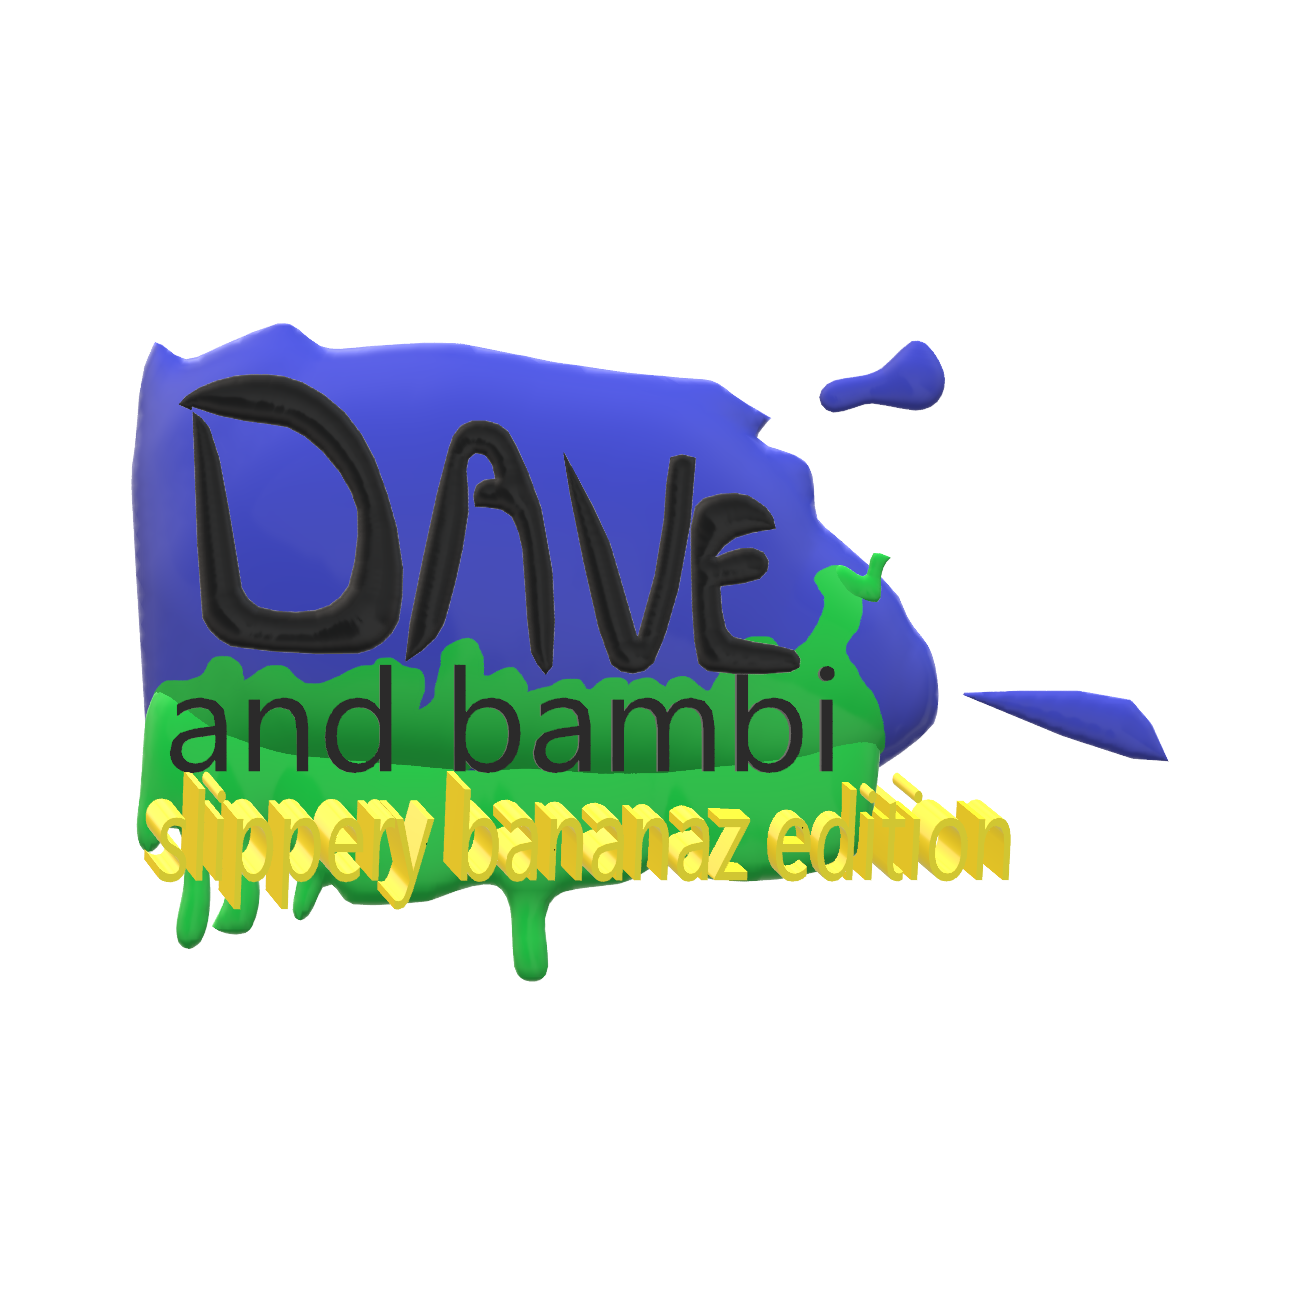 FNF : Dave and bambi slippery bananza edition